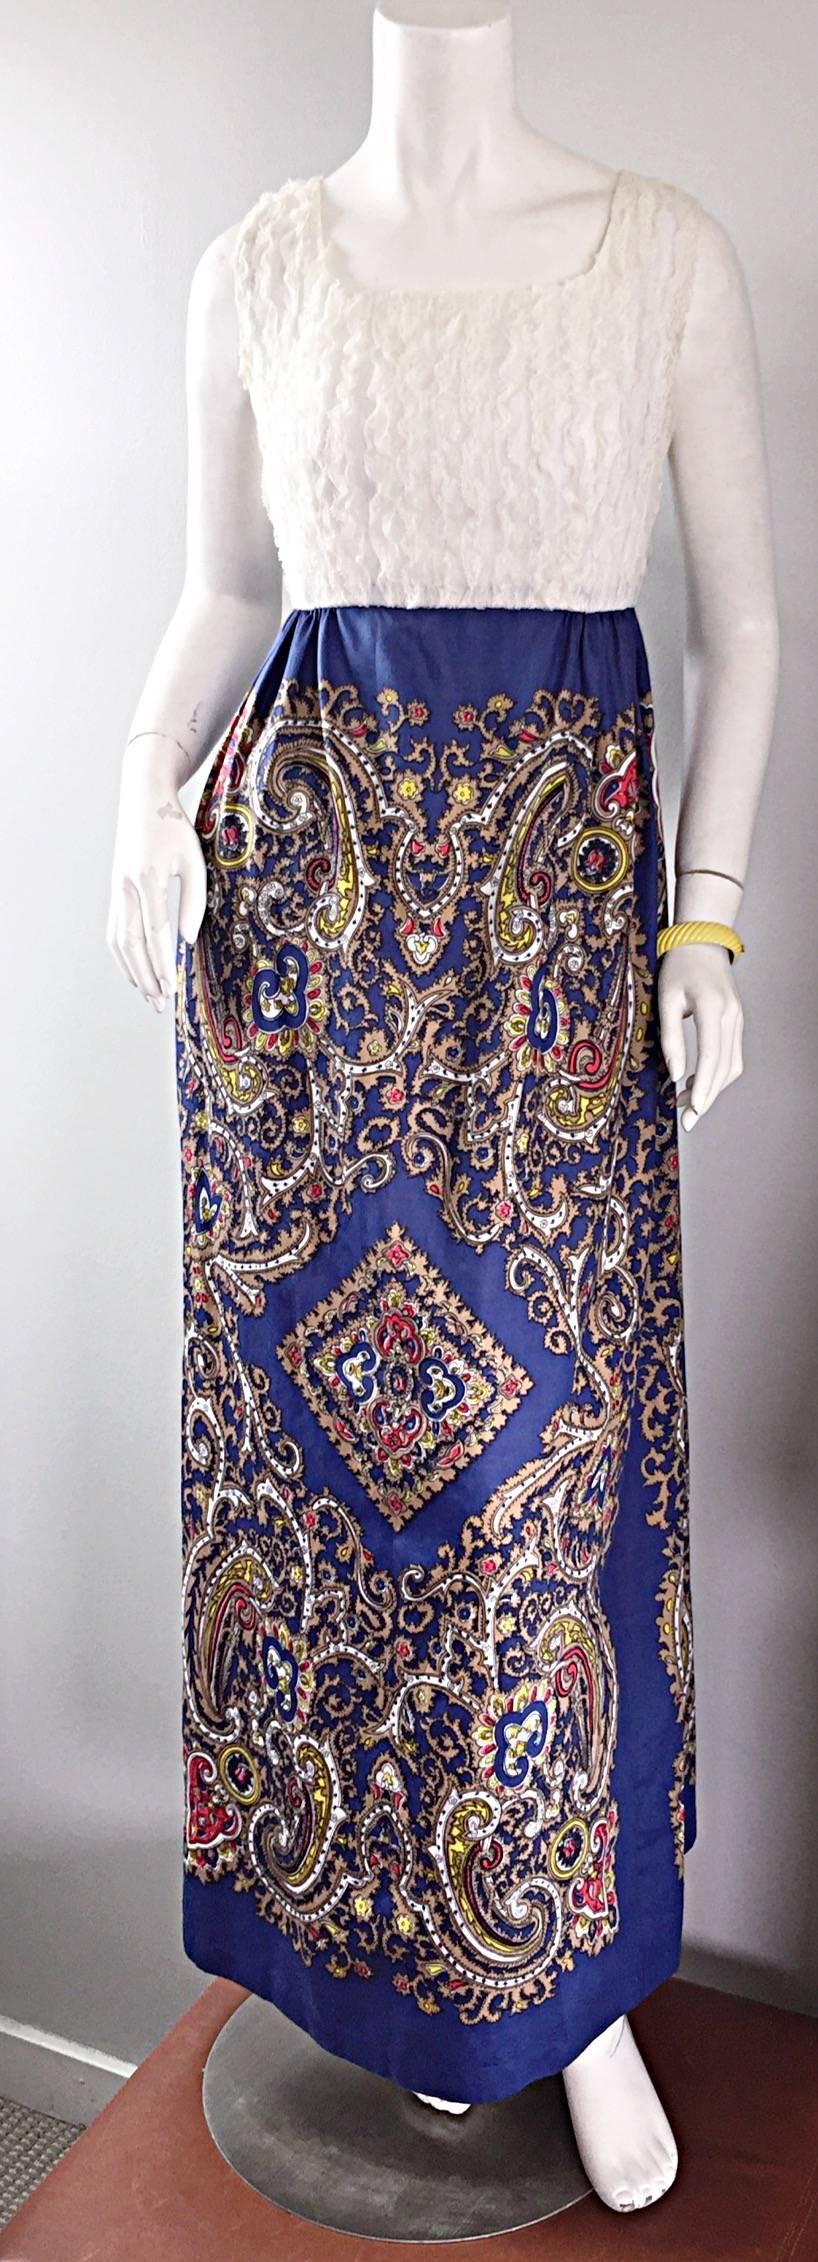 Stunning 1970s bohemian styled dress! Features a white silk French lace vertically tiered bodice, with and amazing paisley screen printed blue cotton skirt. The fabric on this gem is simply divine! Fully lined bodice with a free flowing rich